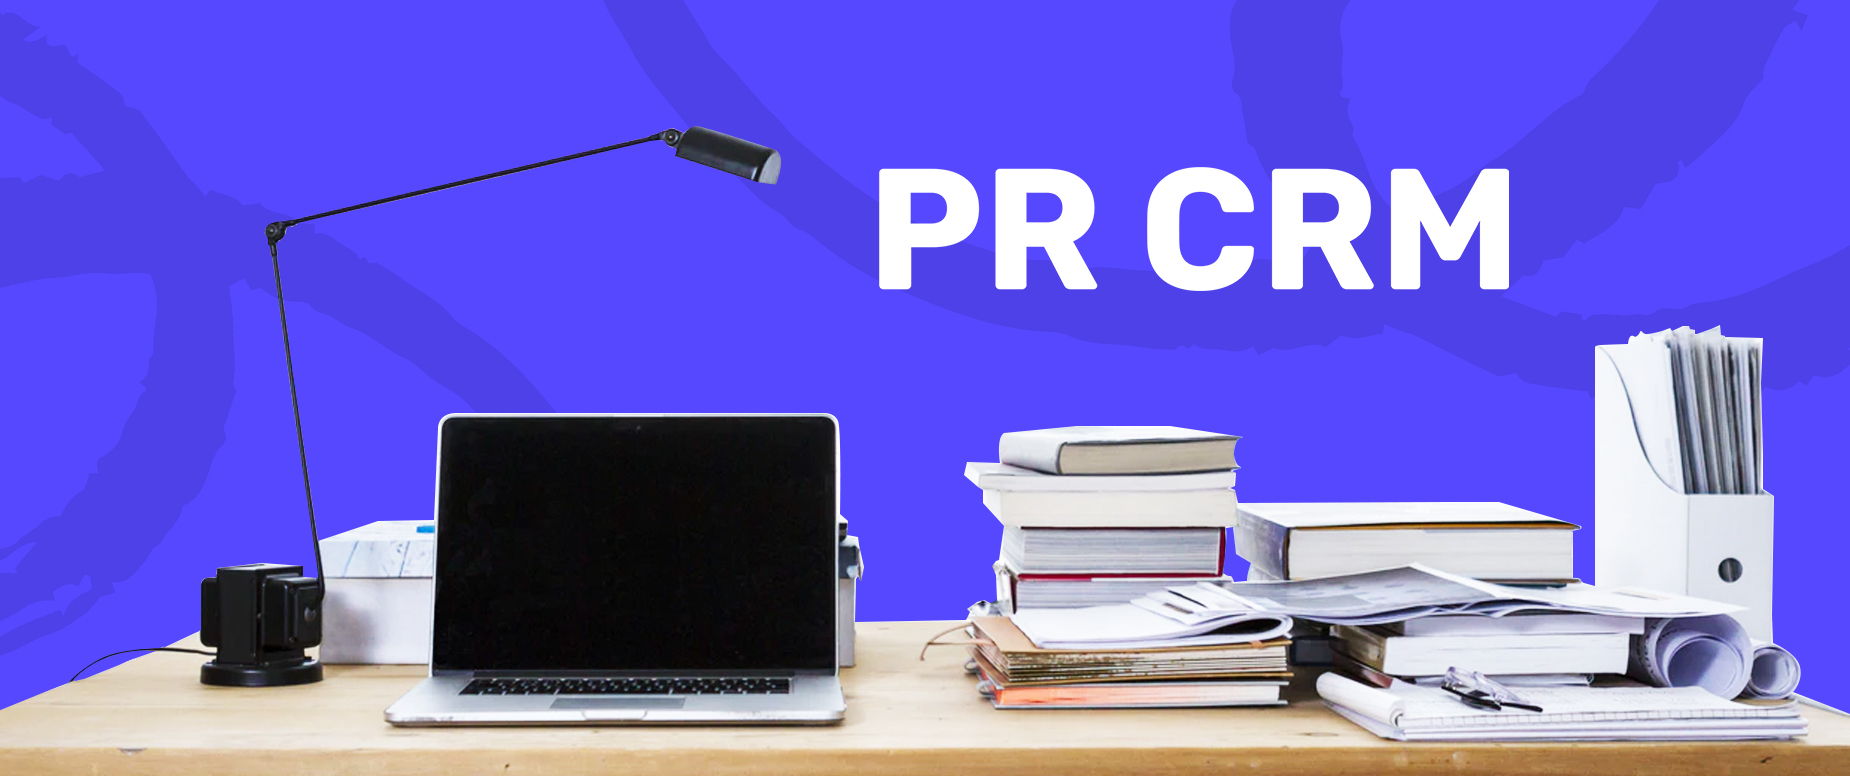 CRM for PR: 20+ PR tools to help manage your media relations